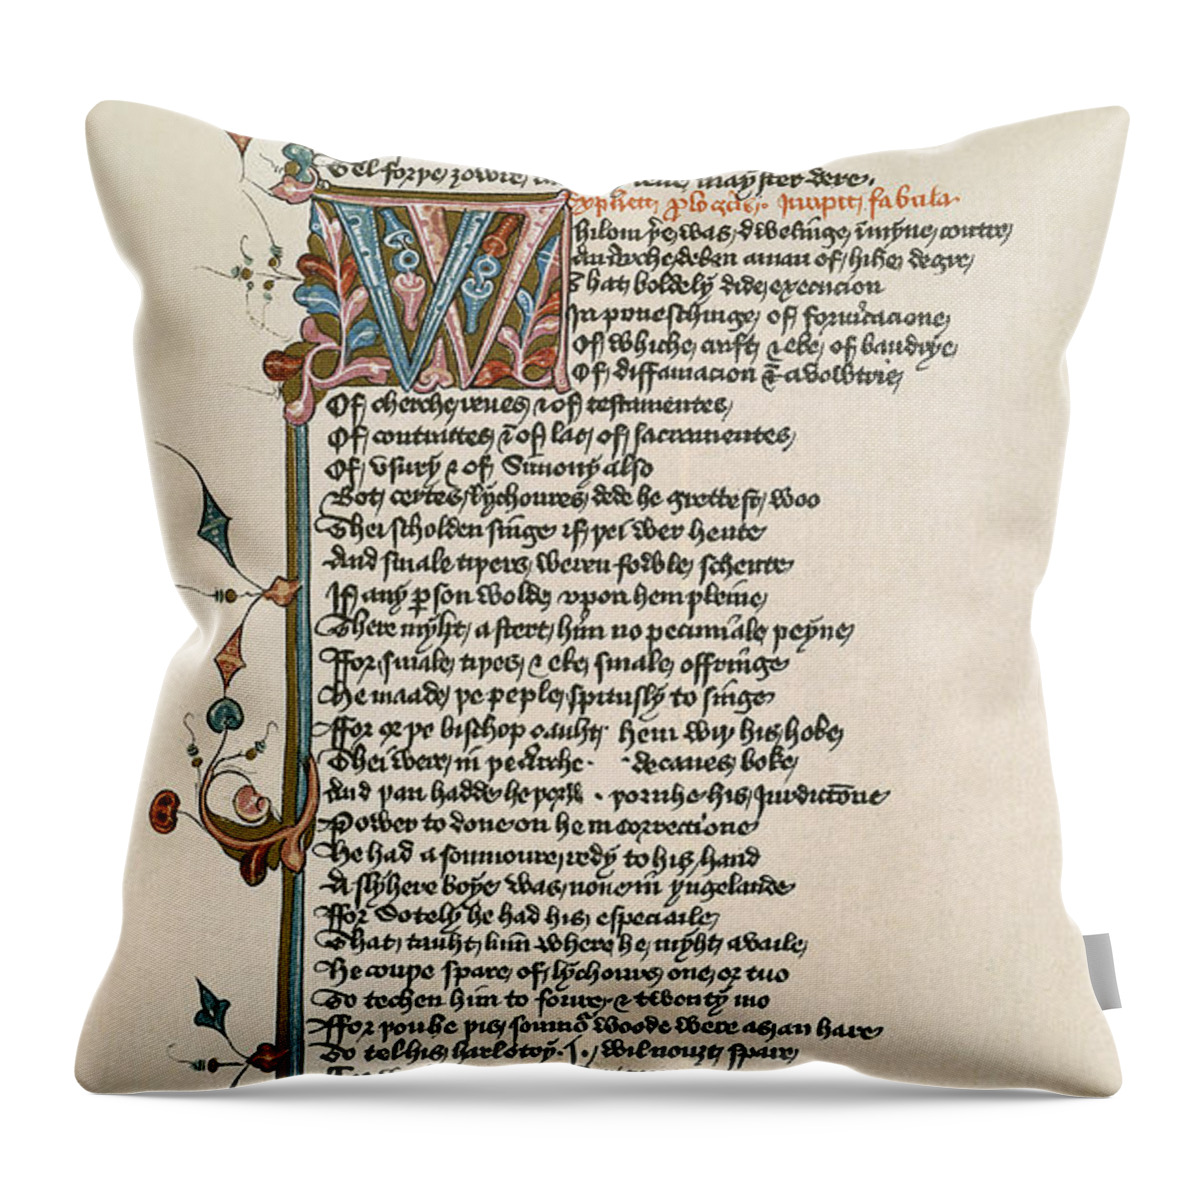  Throw Pillow featuring the painting Canterbury Tales by Granger